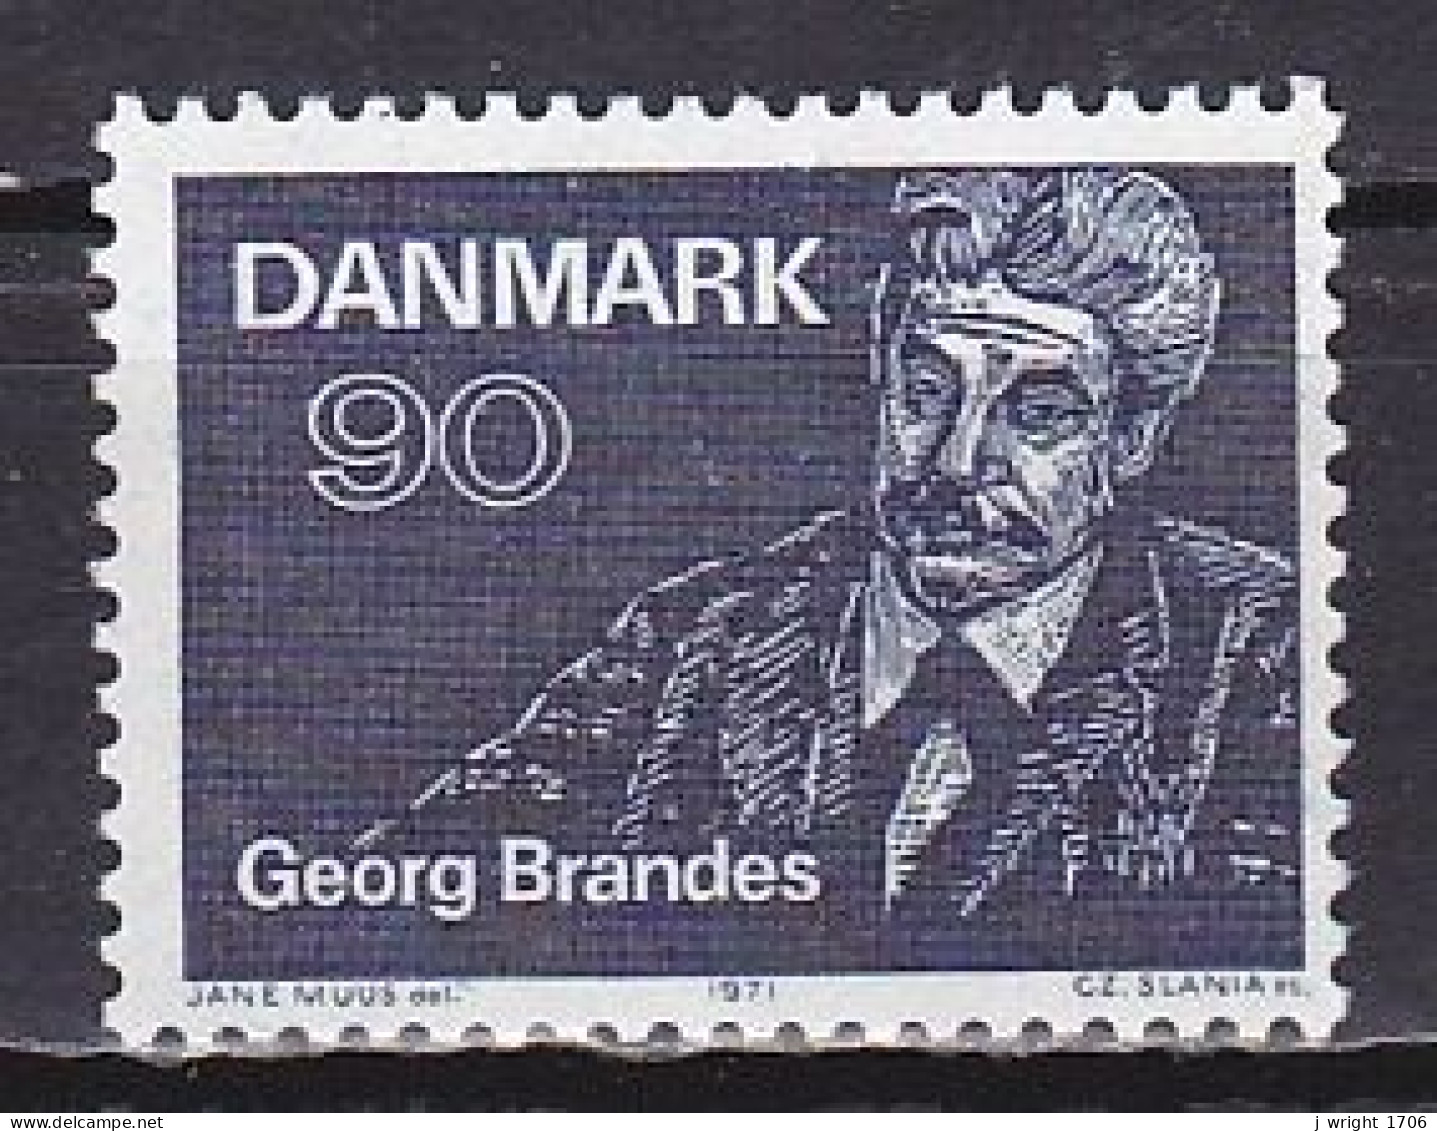 Denmark, 1971, Georg Brandes First Lectures Centenary, 90ø, MH - Unused Stamps